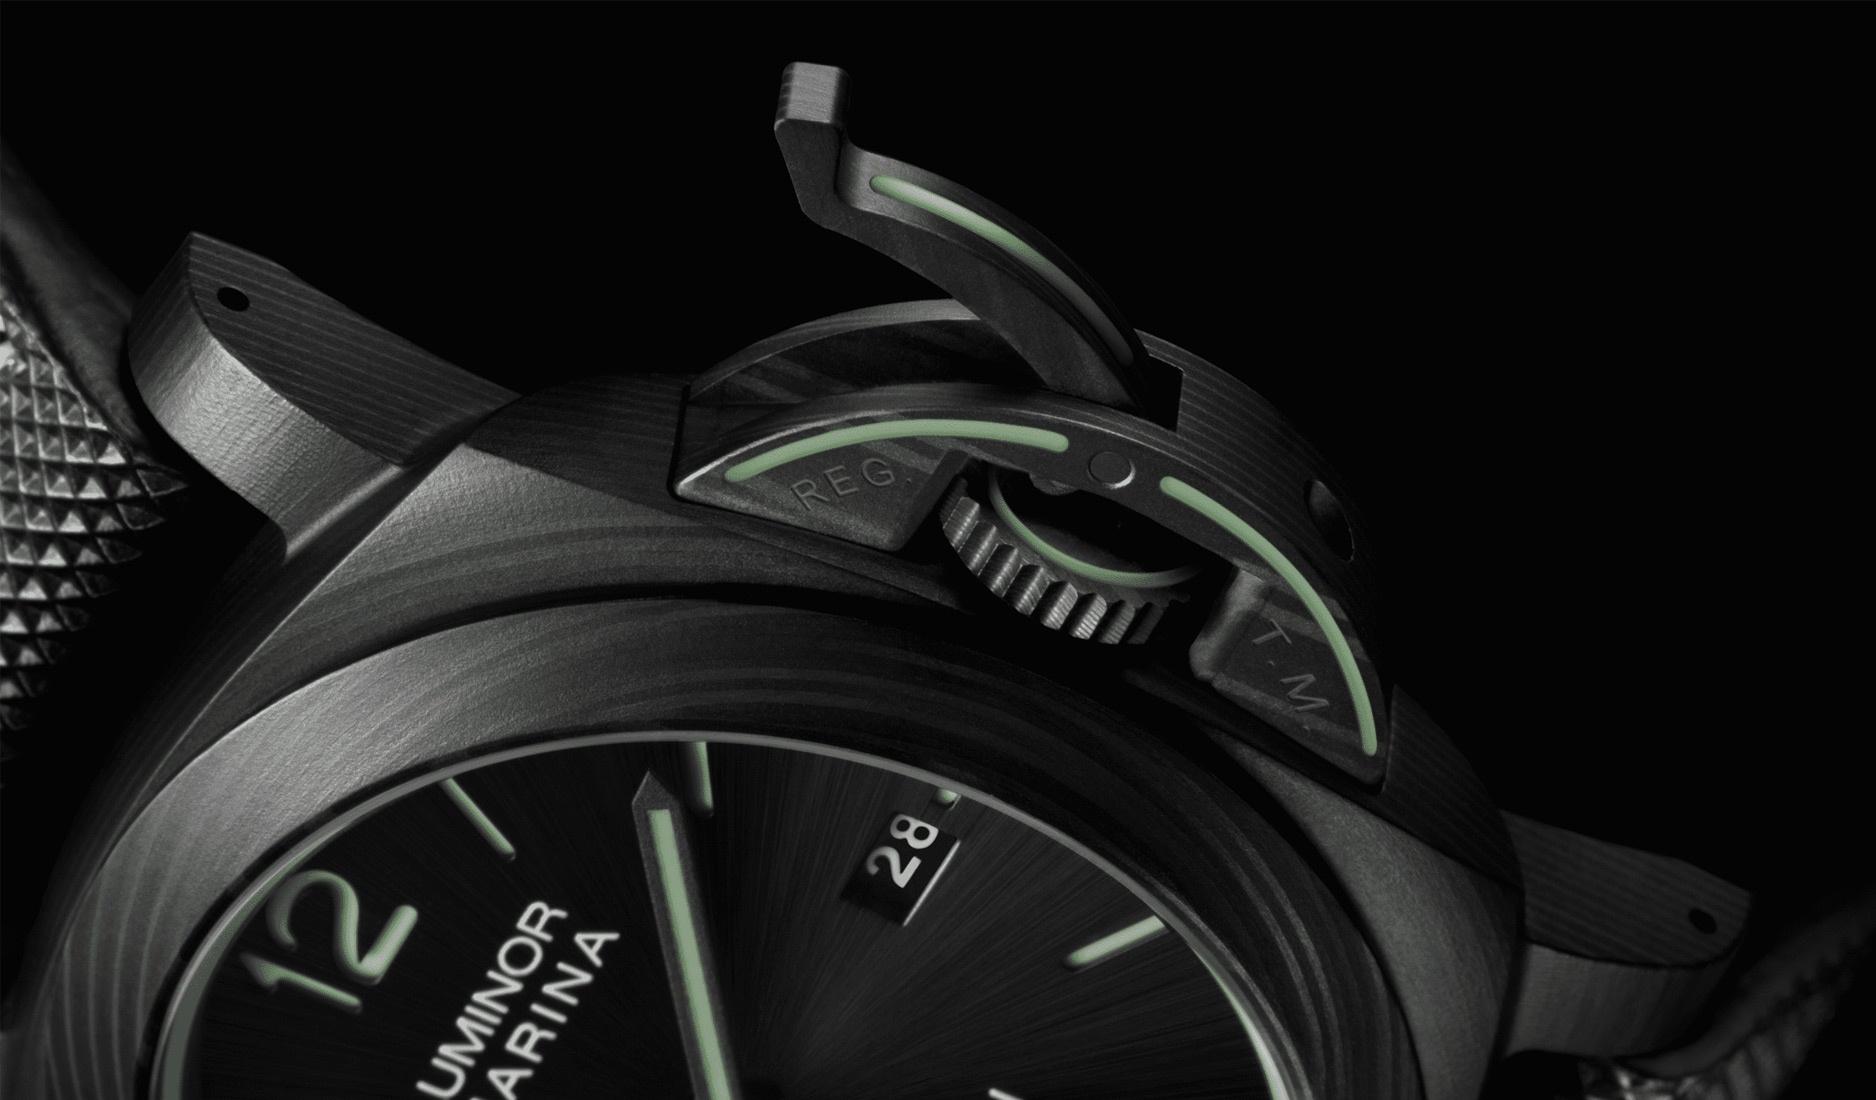 Panerai Luminor Marina Carbotech with a case comprising carbon fibre sheets that are fused under high pressure and fortified with an advanced polymer